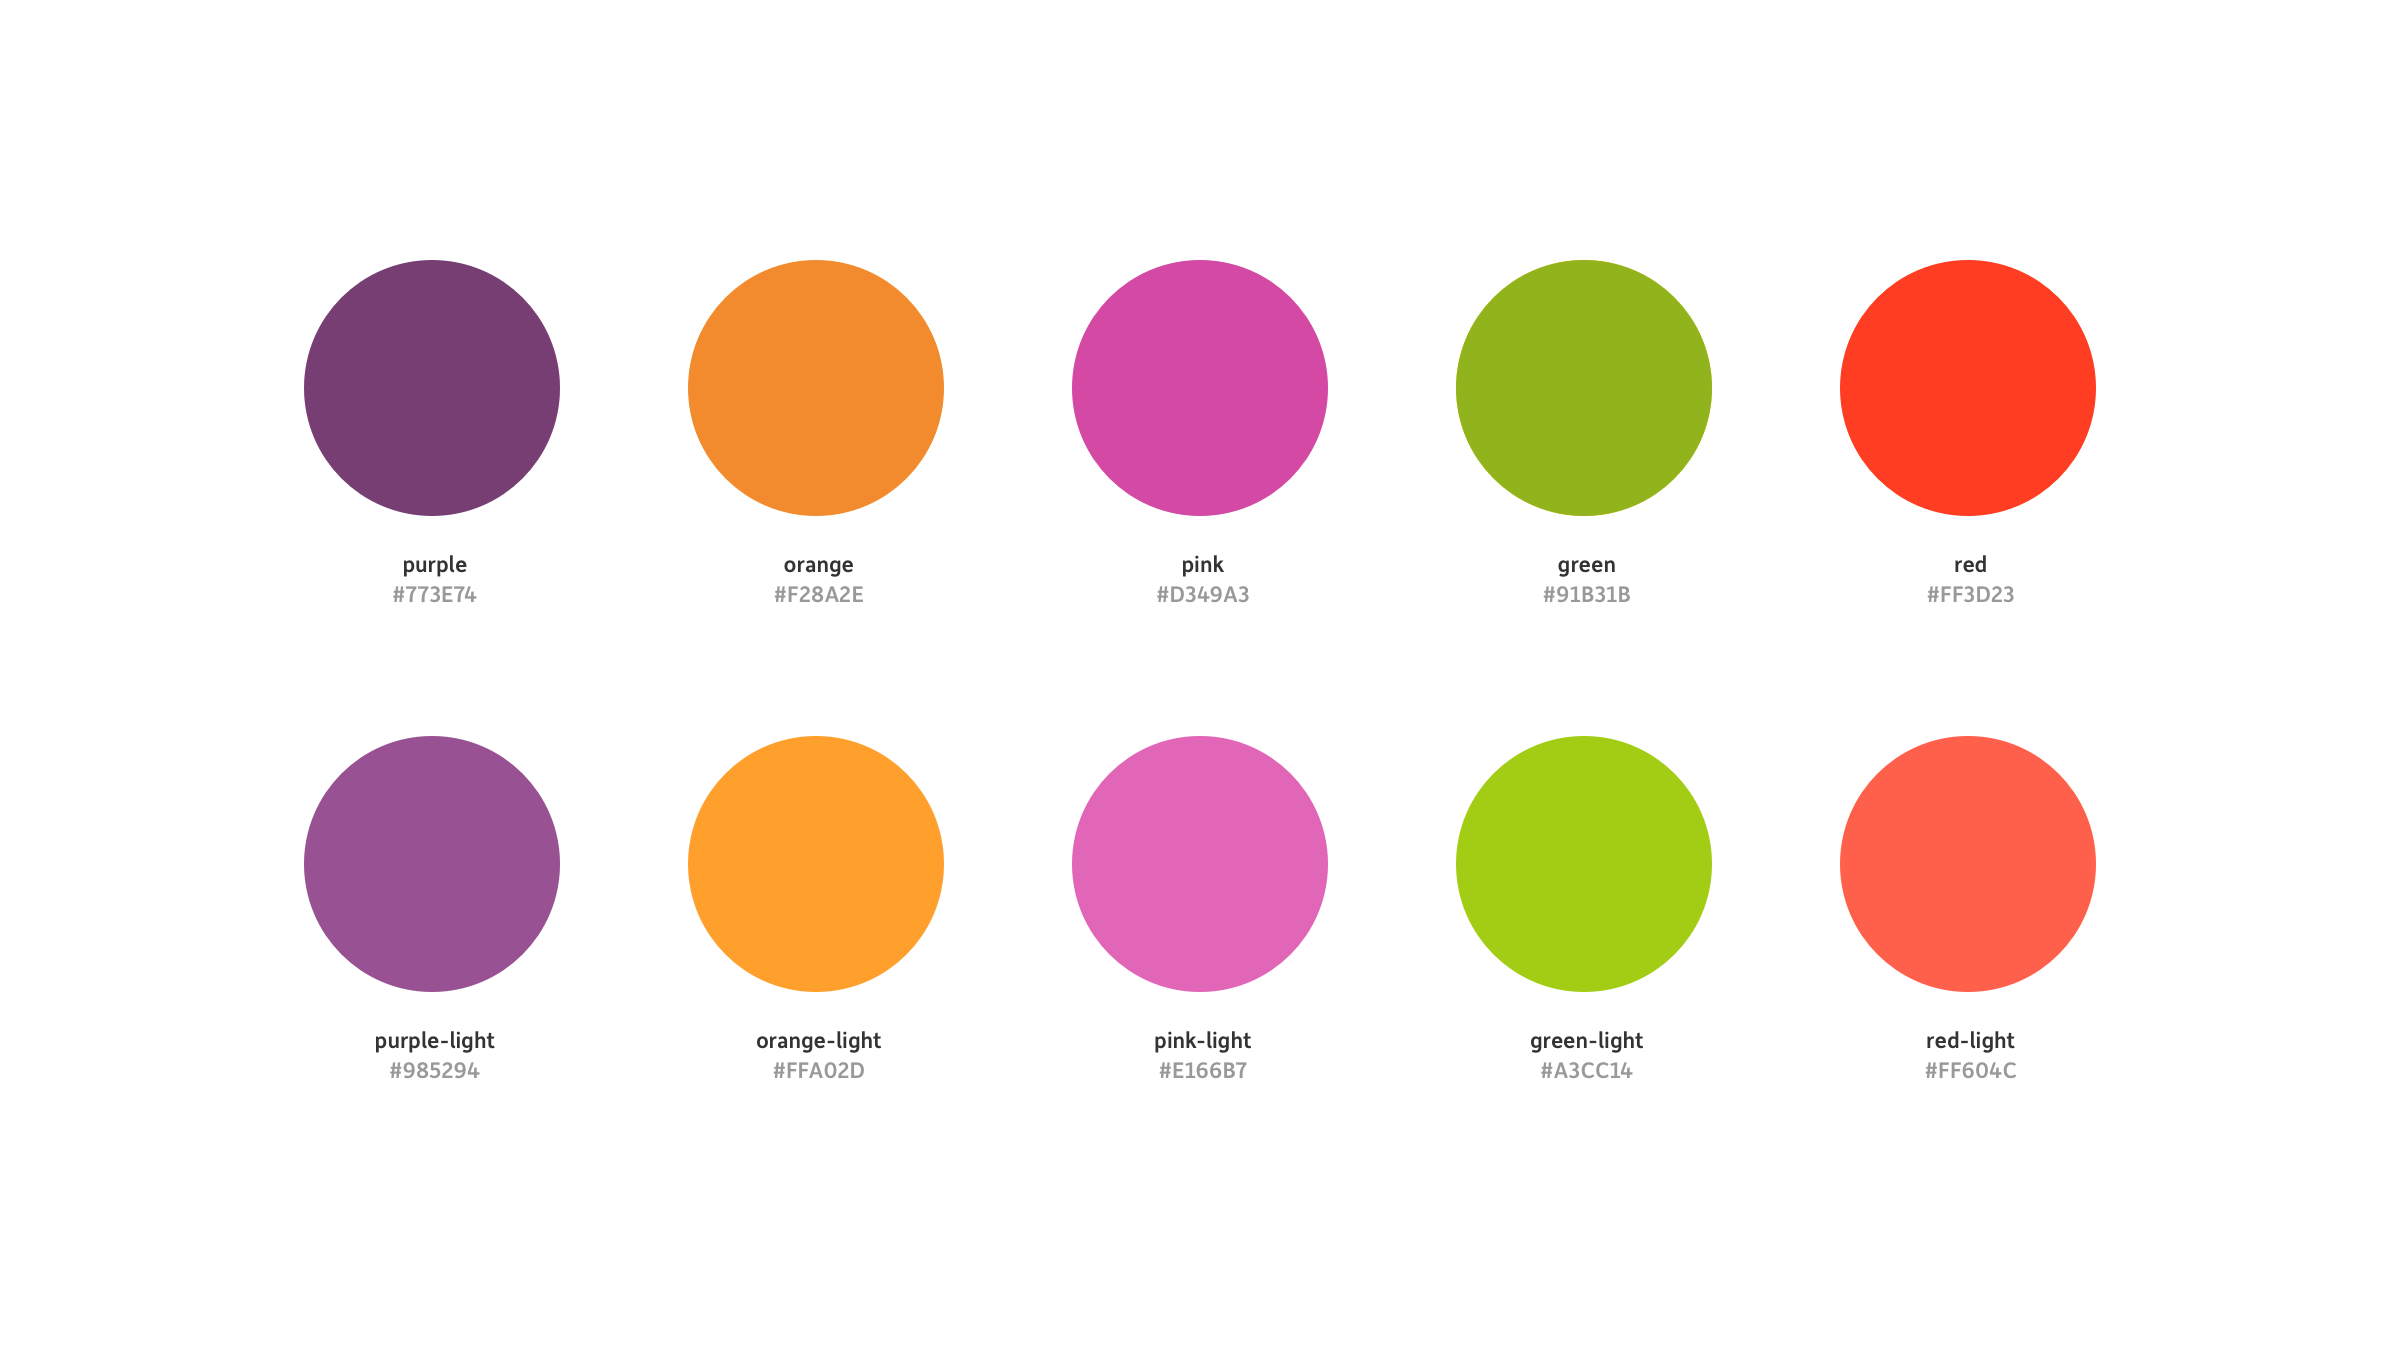 Secondary colors and color pairings